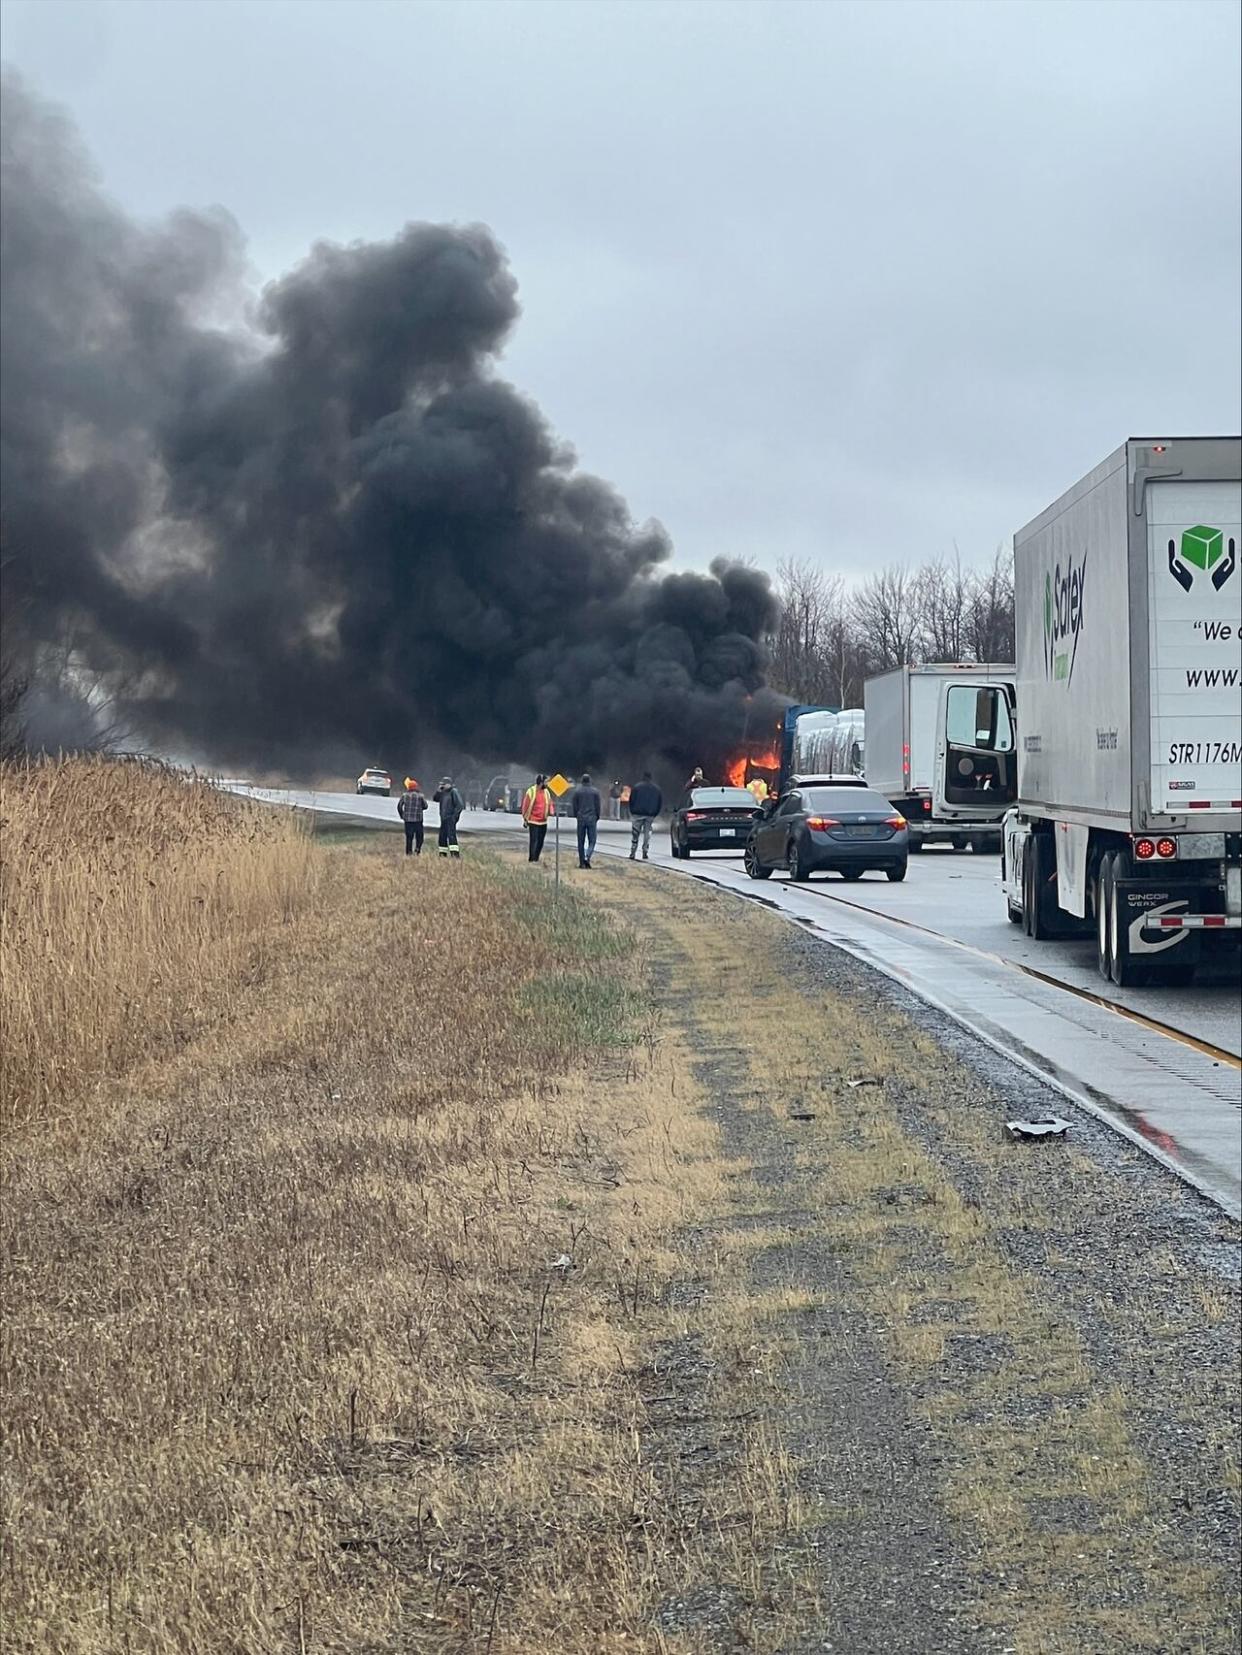 The westbound lanes of a section of Highway 417 near Limoges, Ont., reopened early Wednesday morning following a fatal crash Tuesday afternoon. Two people were pronounced dead at the scene, according to police. In this submitted photo, bystanders watch as a vehicle goes up in flames. (Submitted by Dave Dudley - image credit)